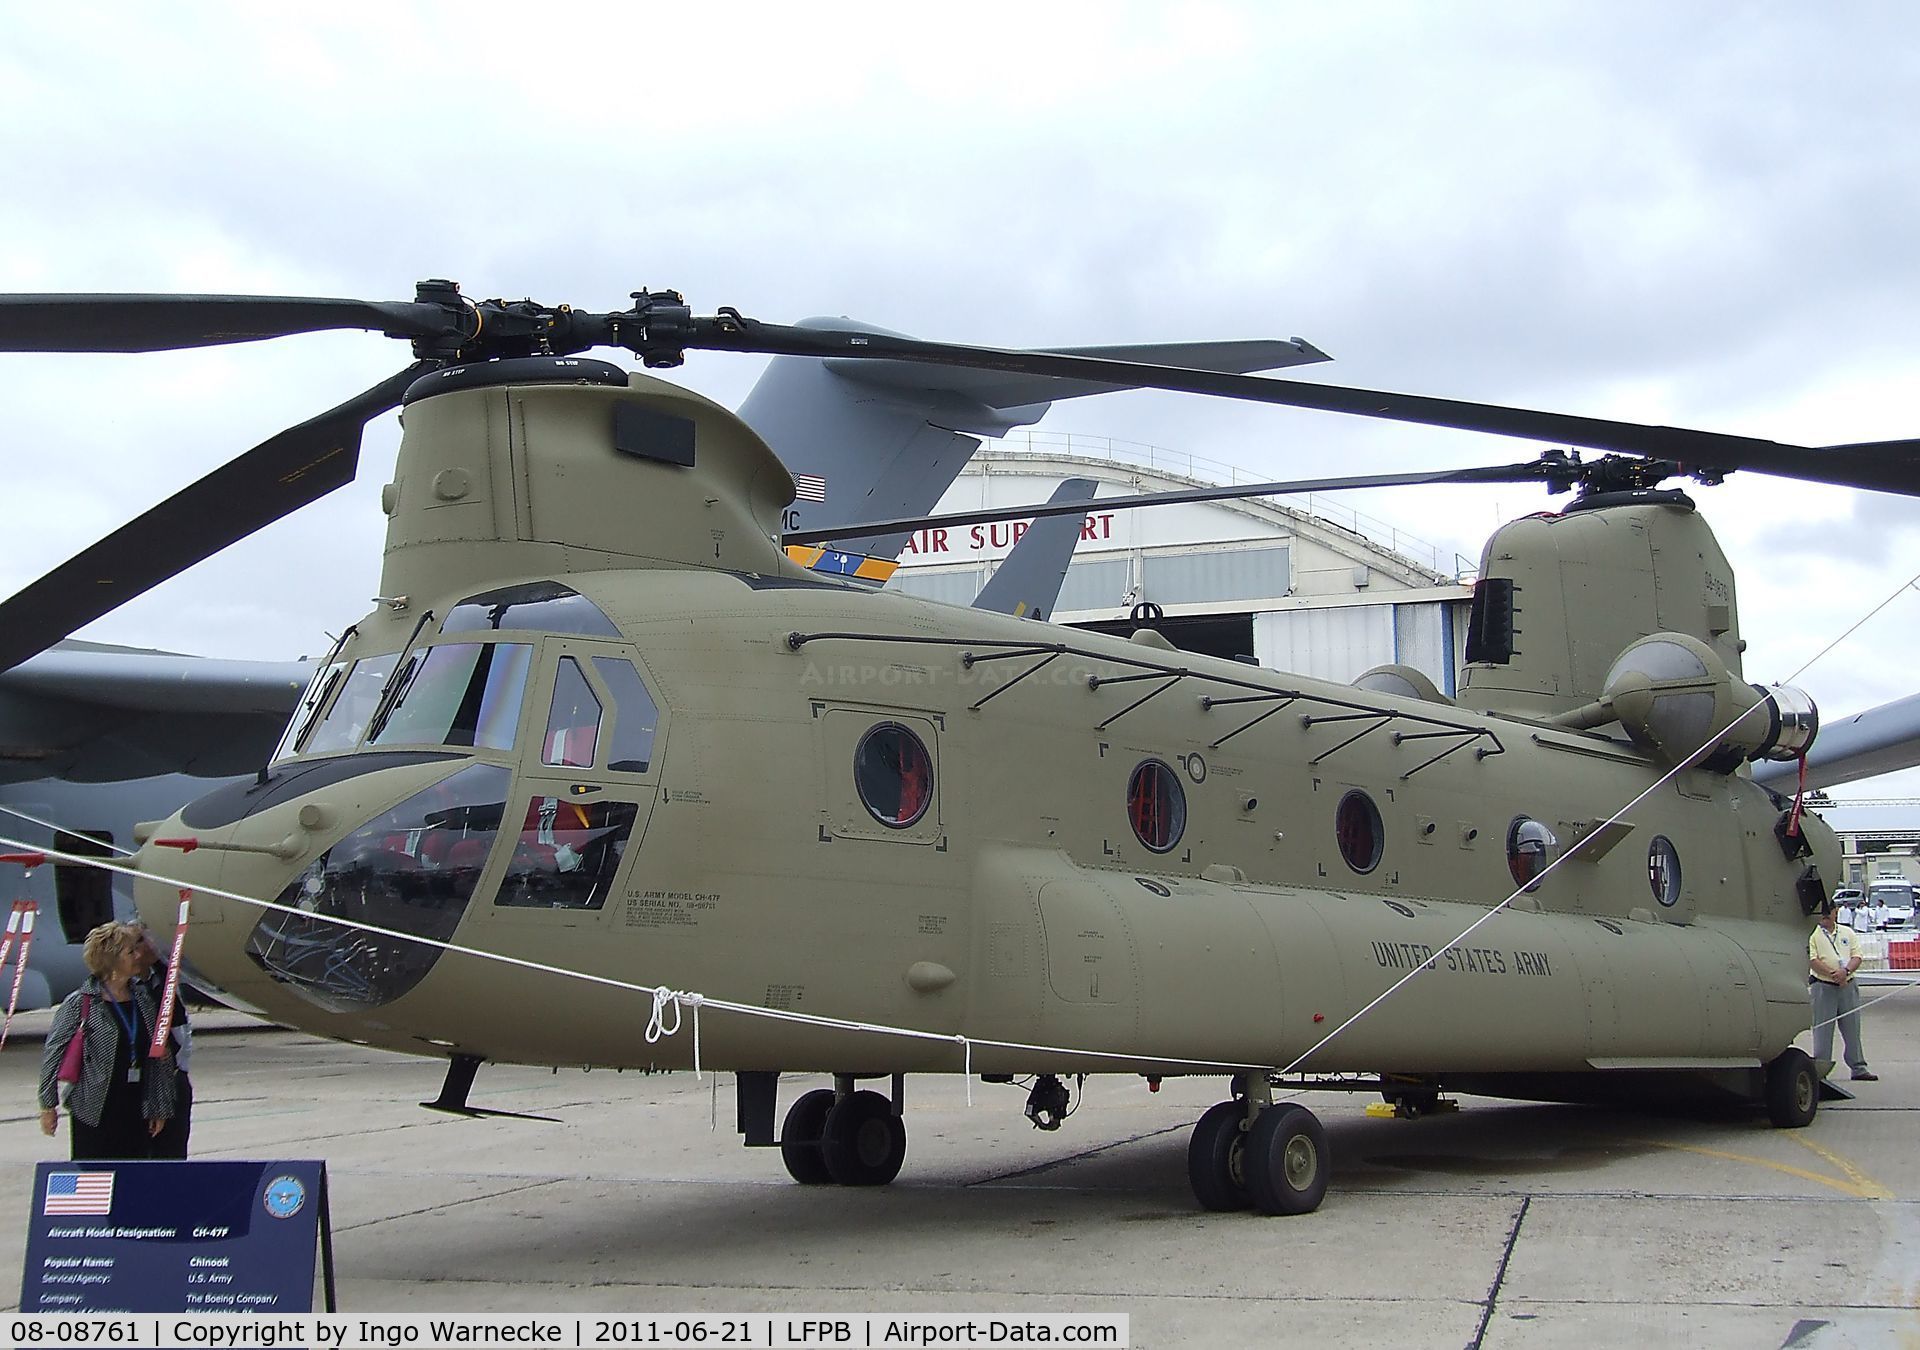 08-08761, 2008 Boeing CH-47F Chinook C/N M8761, Boeing CH-47F Chinook of the US Army at the Aerosalon 2011, Paris